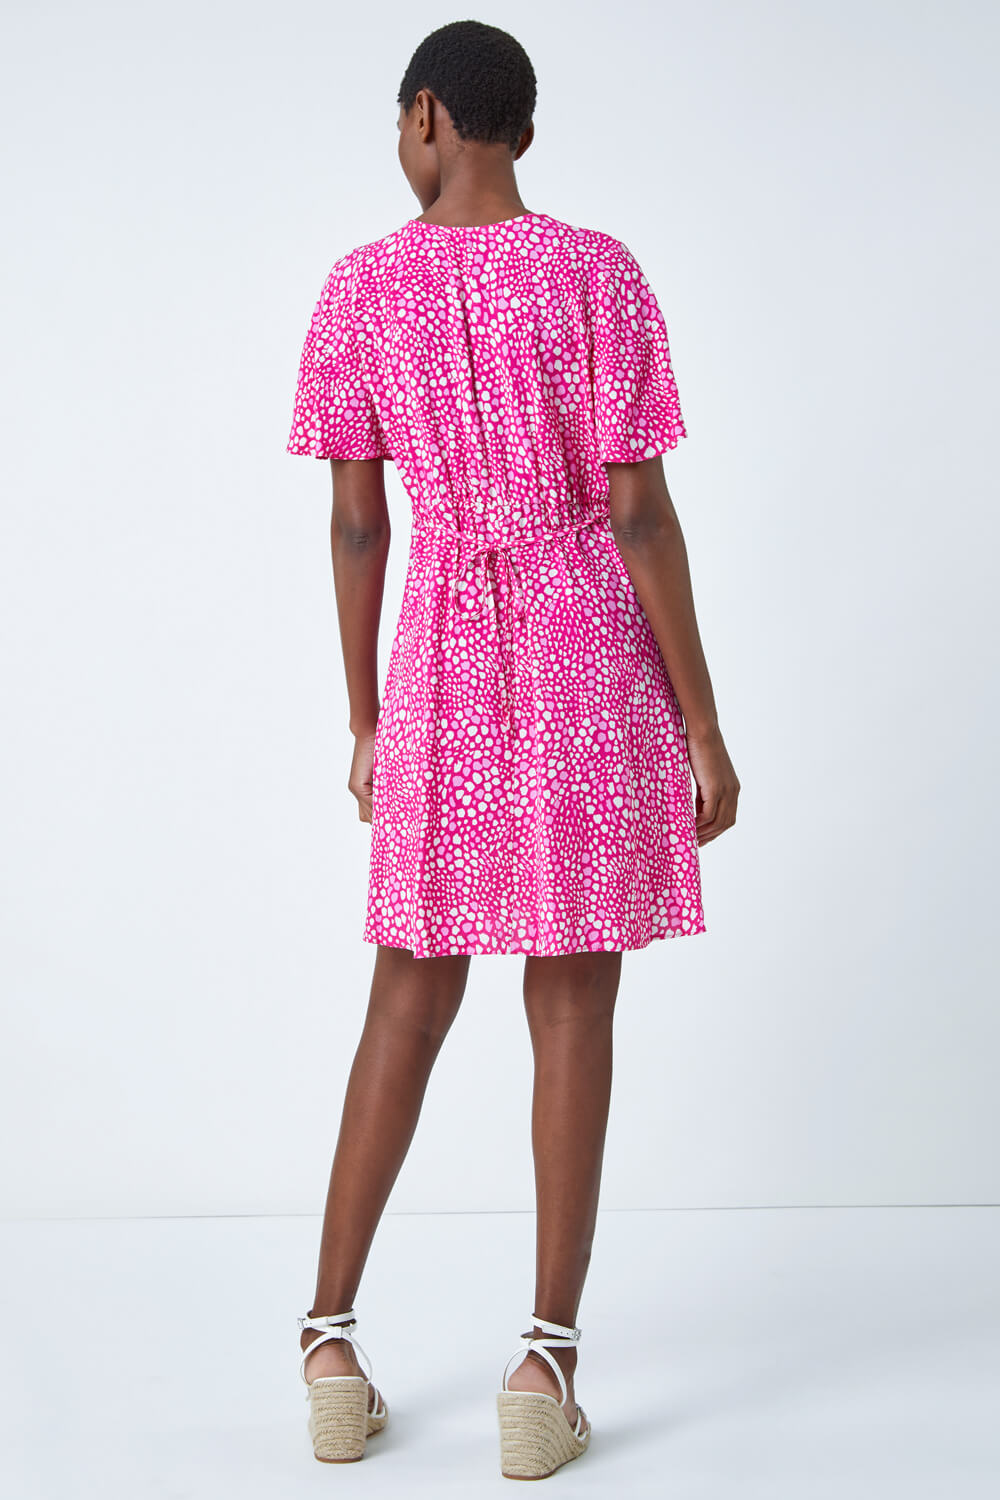 PINK Ditsy Spot Print Button Dress, Image 3 of 5